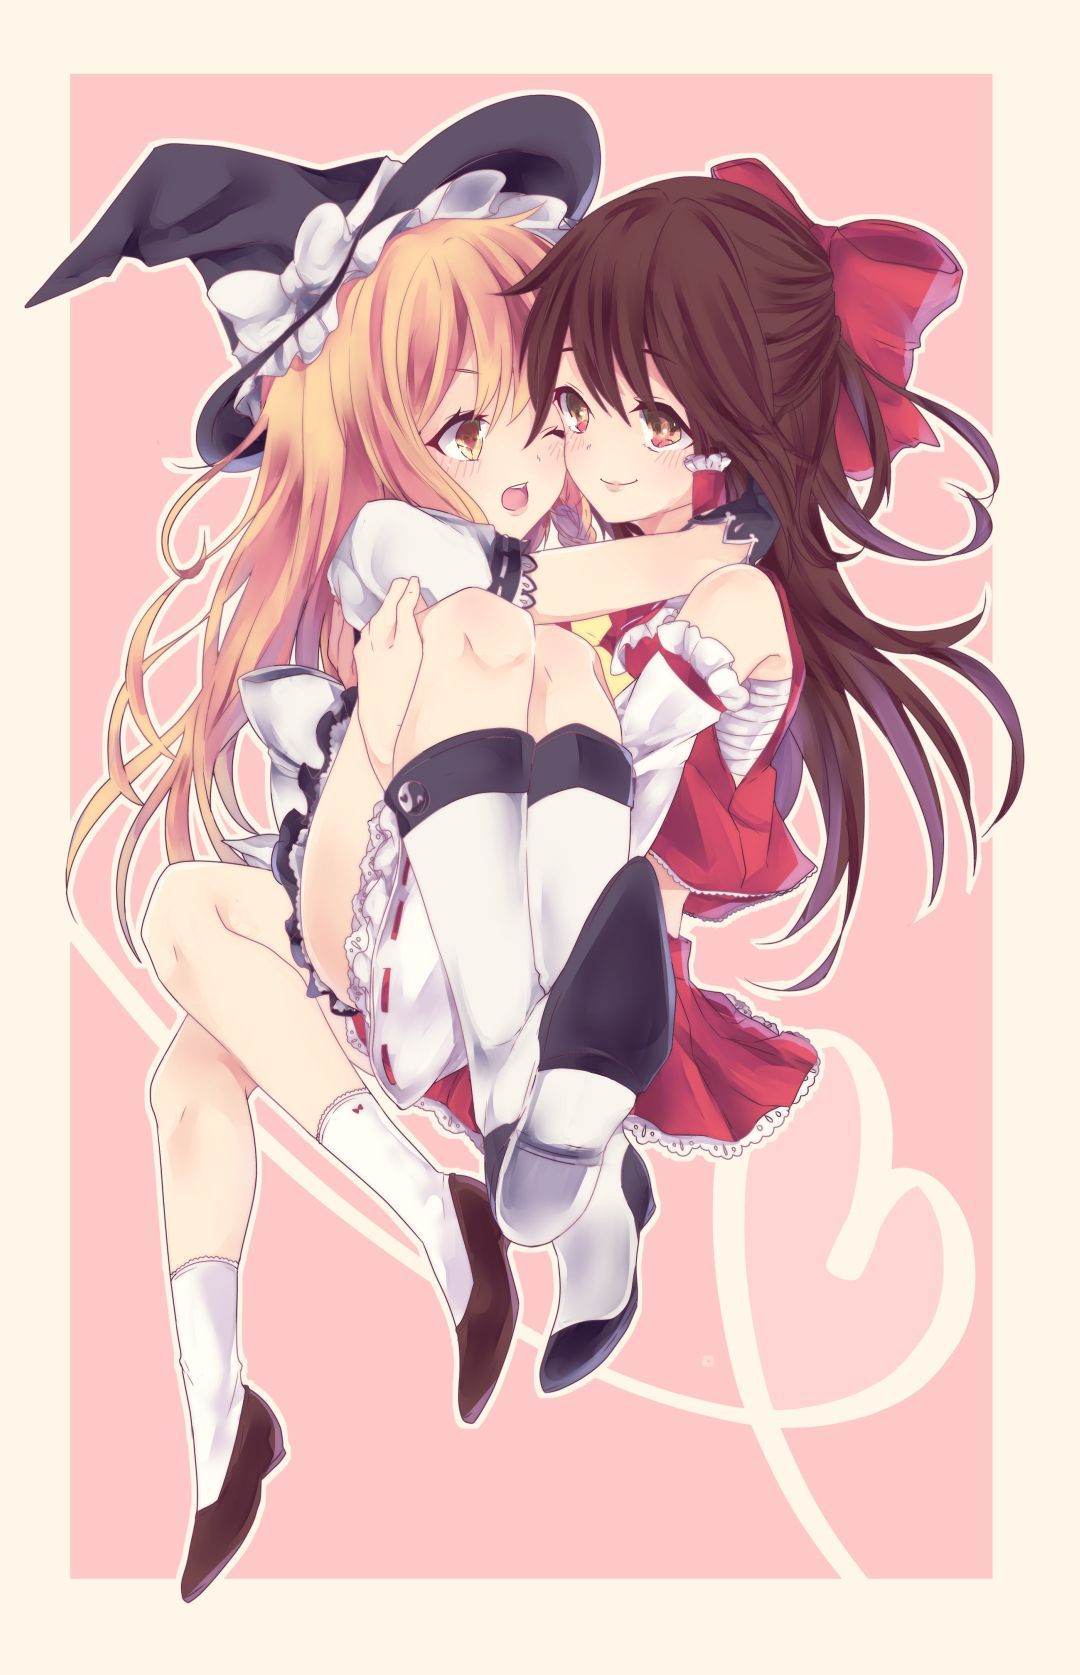 [Secondary-ZIP: Yuri lesbian image, or see other girls doing naughty things. 3